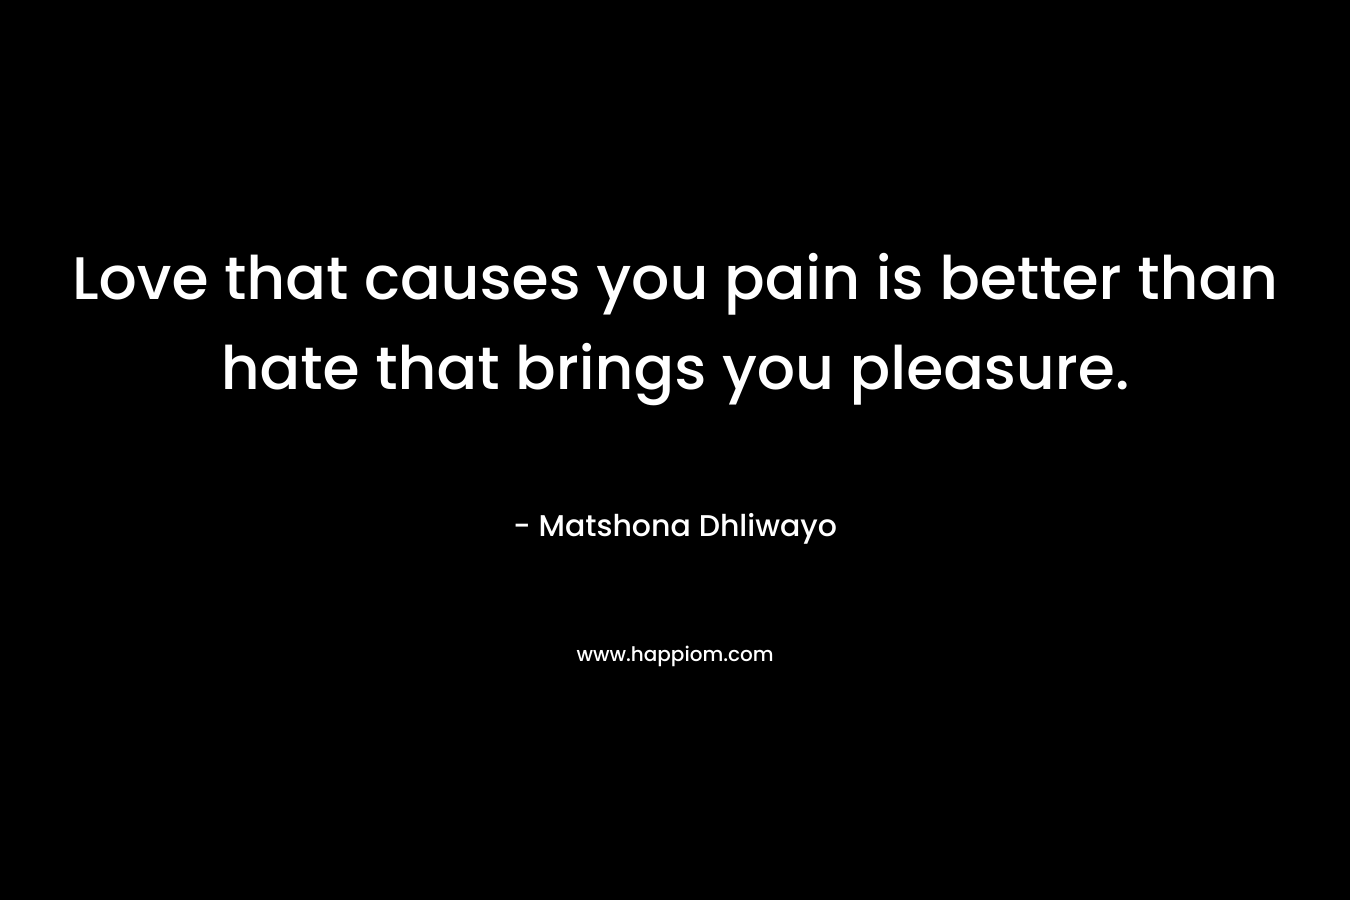 Love that causes you pain is better than hate that brings you pleasure.